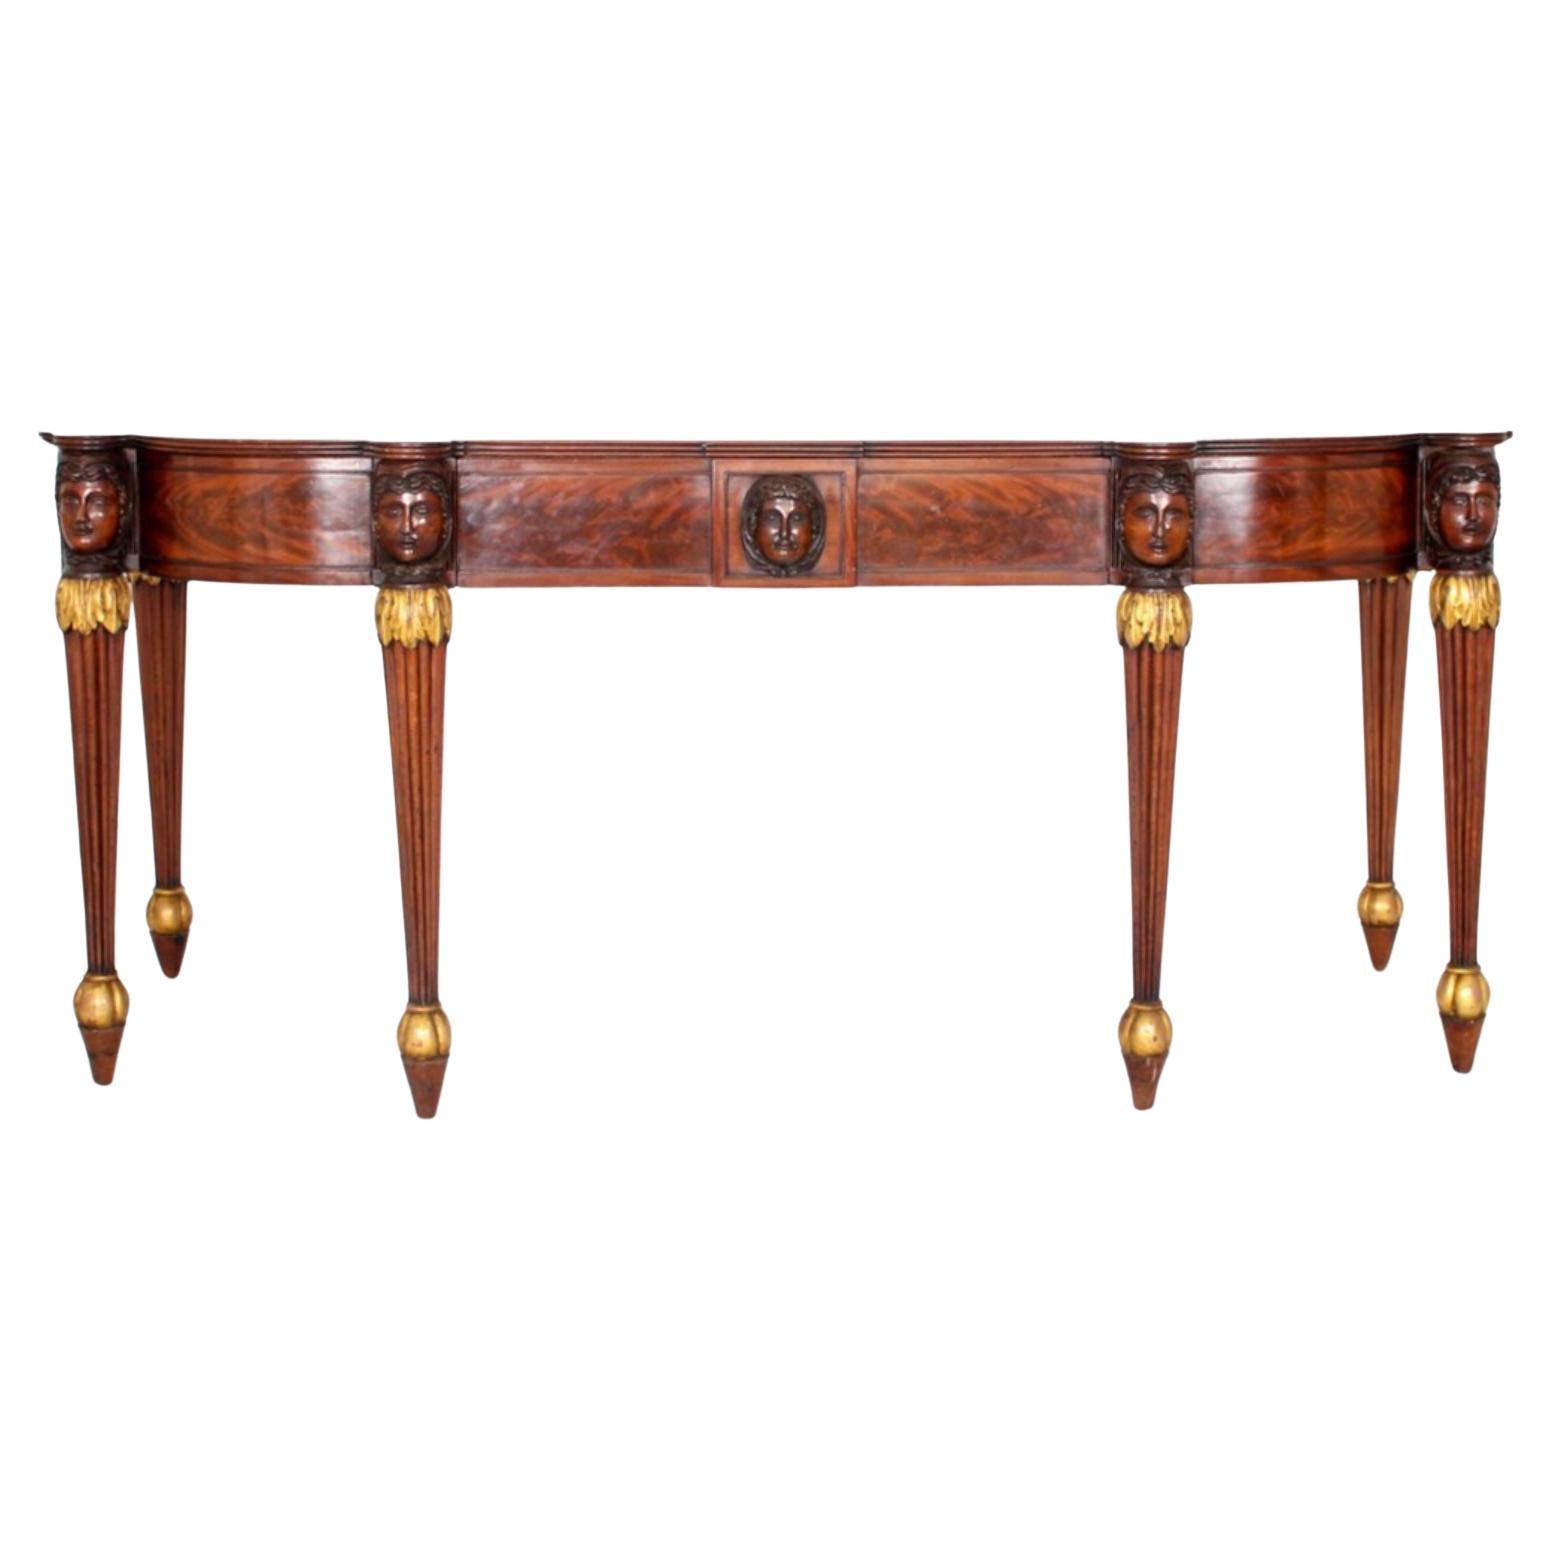 A Pair of Regency Mahogany and Parcel Gilt Serving Tables For Sale